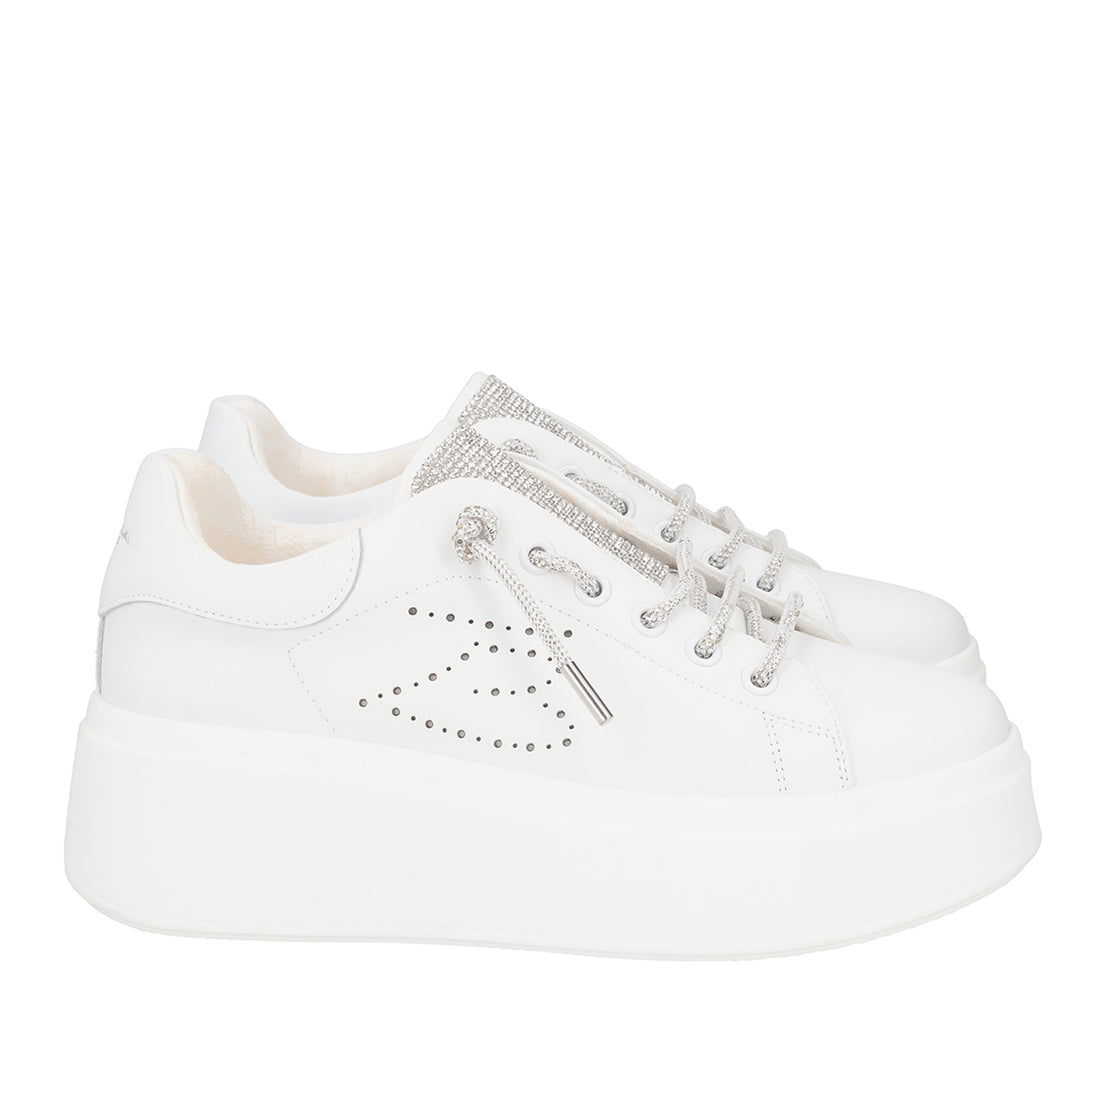 WHITE/SILVER VANITY SNEAKER IN LEATHER WITH MICRO RHINESTONES